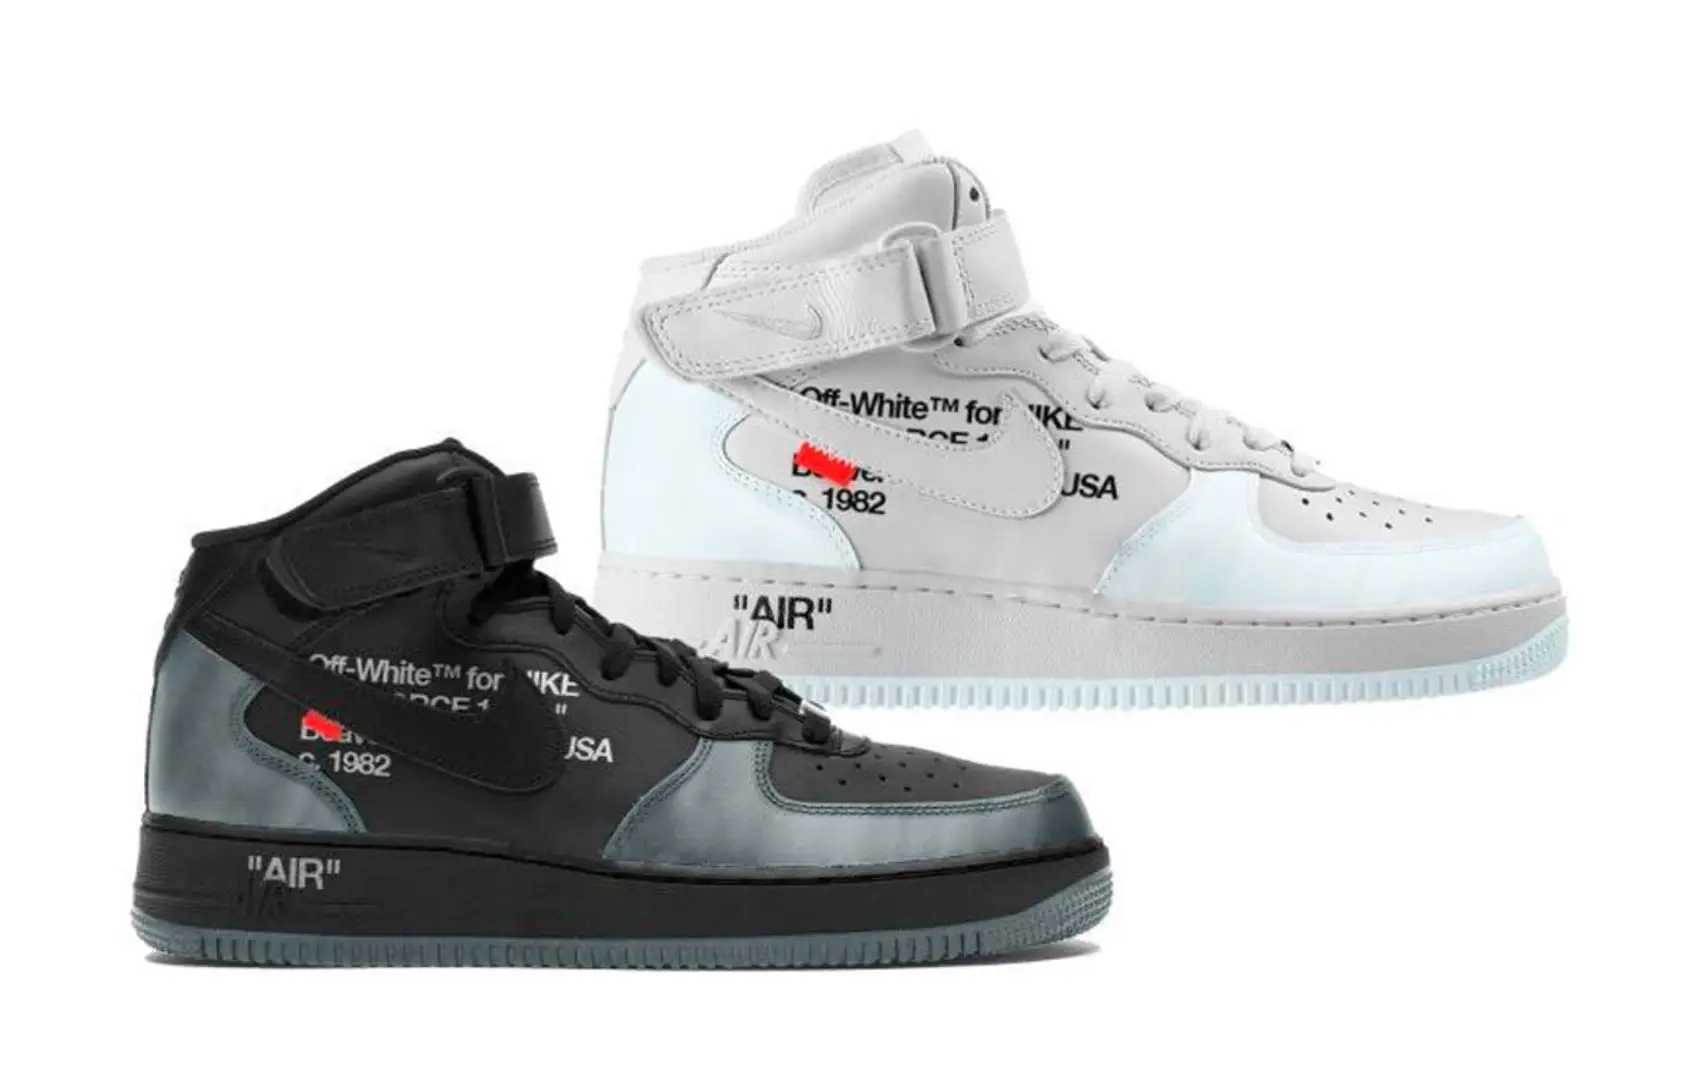 Images of Two Off-White x Nike Air Force 1 Mids Have Surfaced | The ...